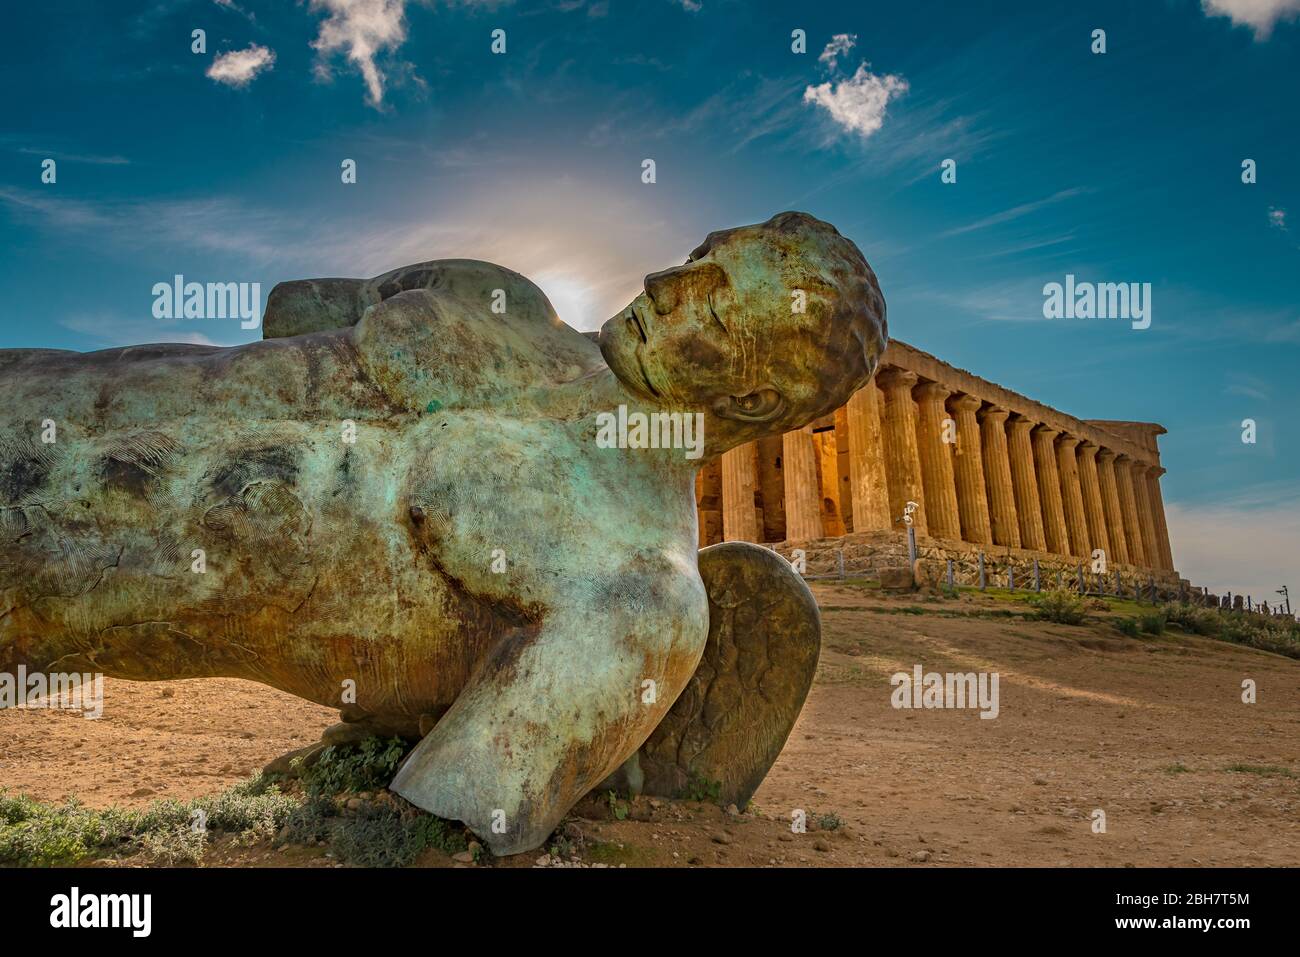 Valle dei Templi(Valley of the Temples) is an archeological site with ruins from Ancient Greece, situated in the Sicilian region of Agrigento, Sicily Stock Photo